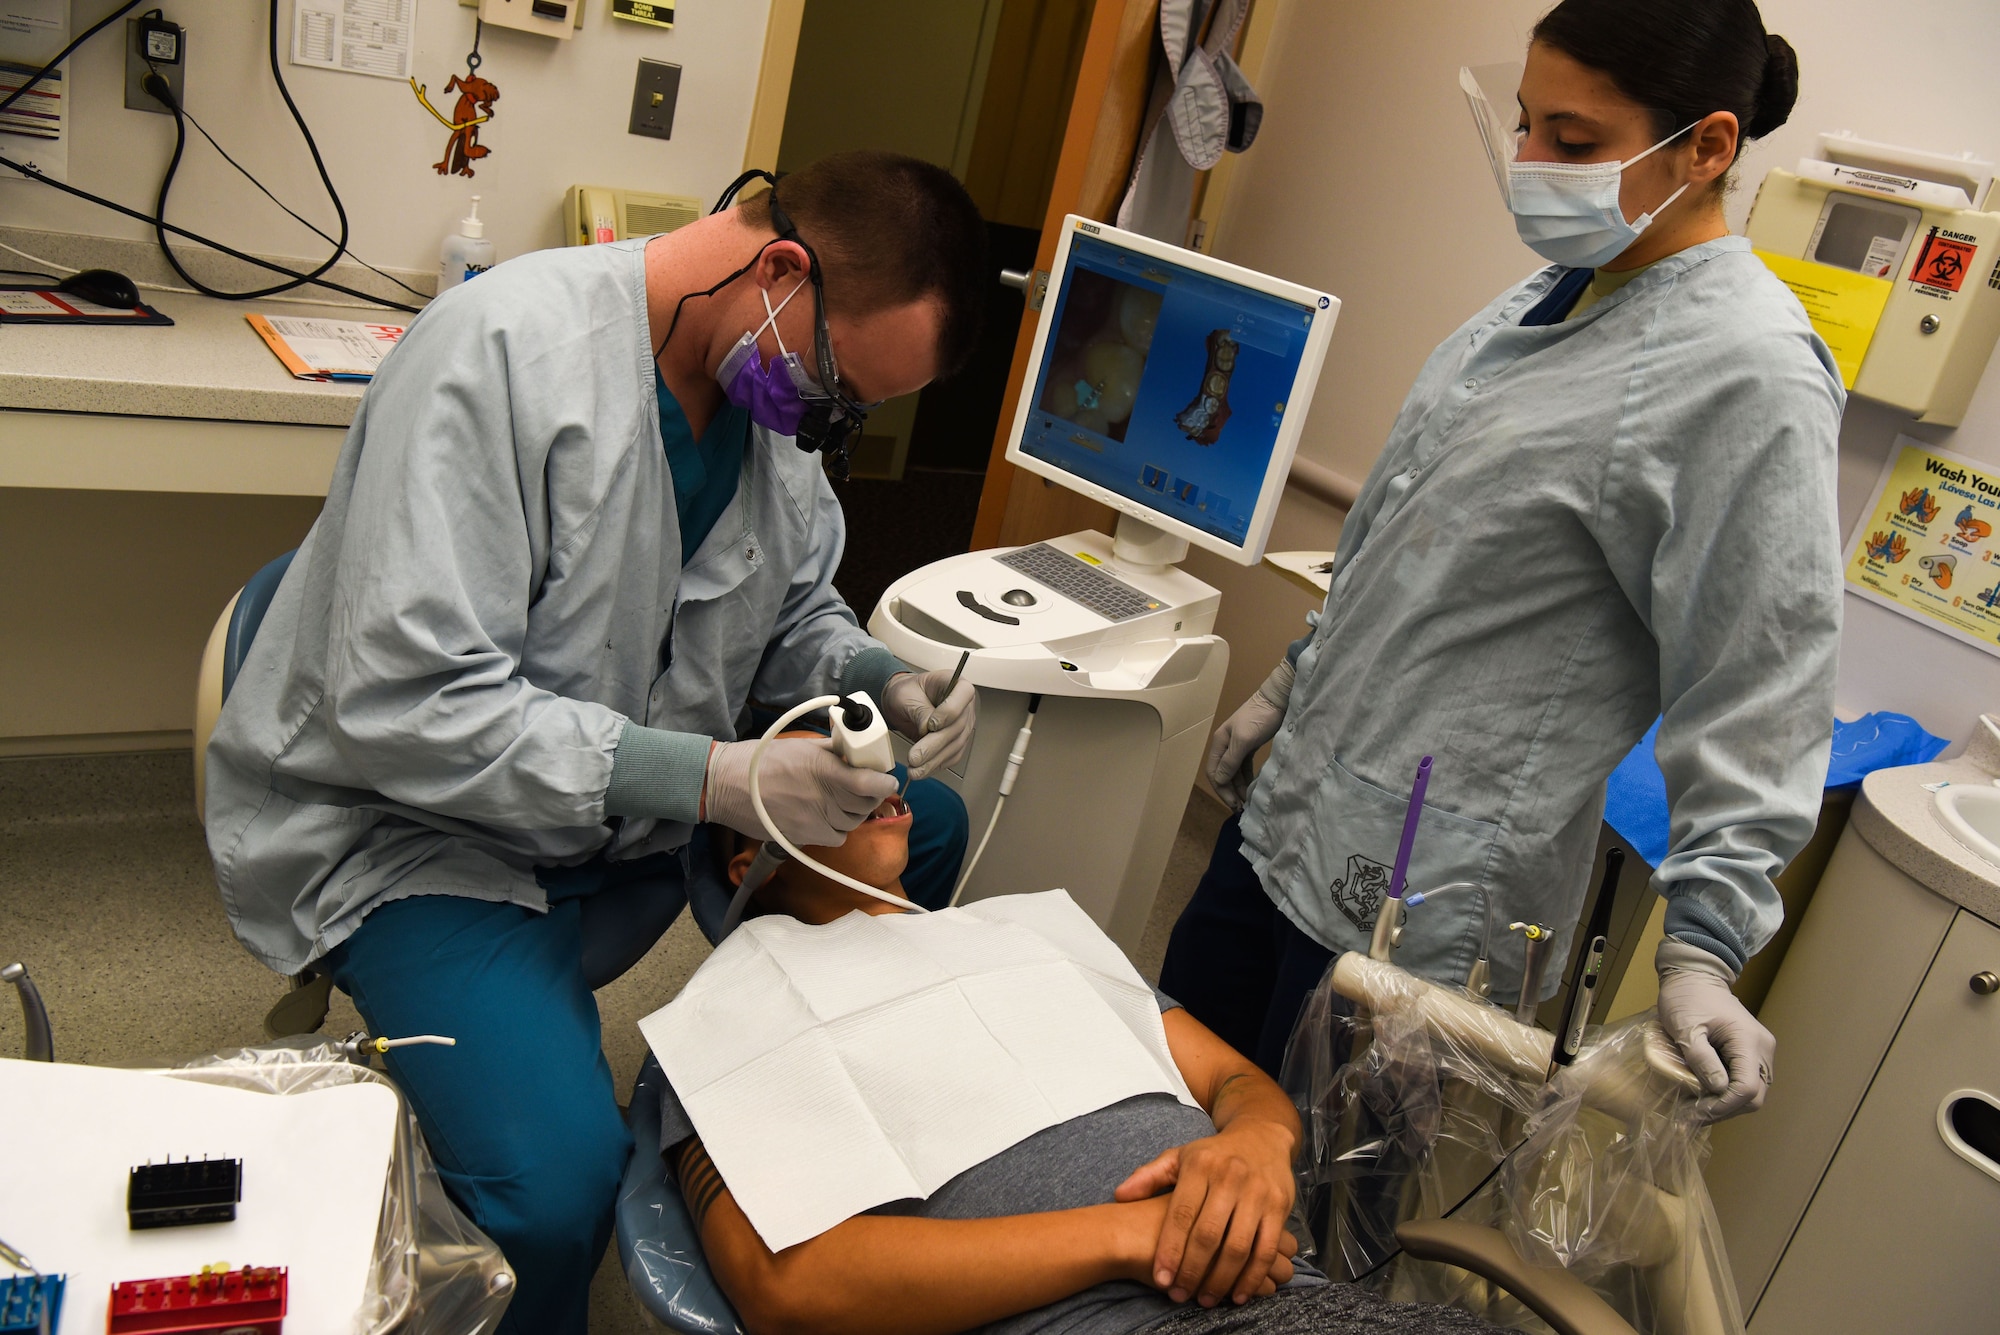 Captain Corey Cook, 90th Medical Group dentist, and Airman 1st Class Amy Demitre, 90th Medical Group dental assistant, scans a patients teeth to make a 3-D photo after removing a silver crown at the dental clinic on F.E. Warren Air Force Base, Wyo., Dec. 19, 2017. The intraoral scanner allows the crown to be designed, made and placed during one appointment, whereas the old technology would take multiple appointments and temporarily result in the patient becoming non-deployable until the new crown was placed. The mission of the U.S. Air Force Dental Corps is to achieve superior oral health and global readiness through safe, effective and patient-centered care. (U.S. Air Force photo by Airman 1st Class Abbigayle Wagner)